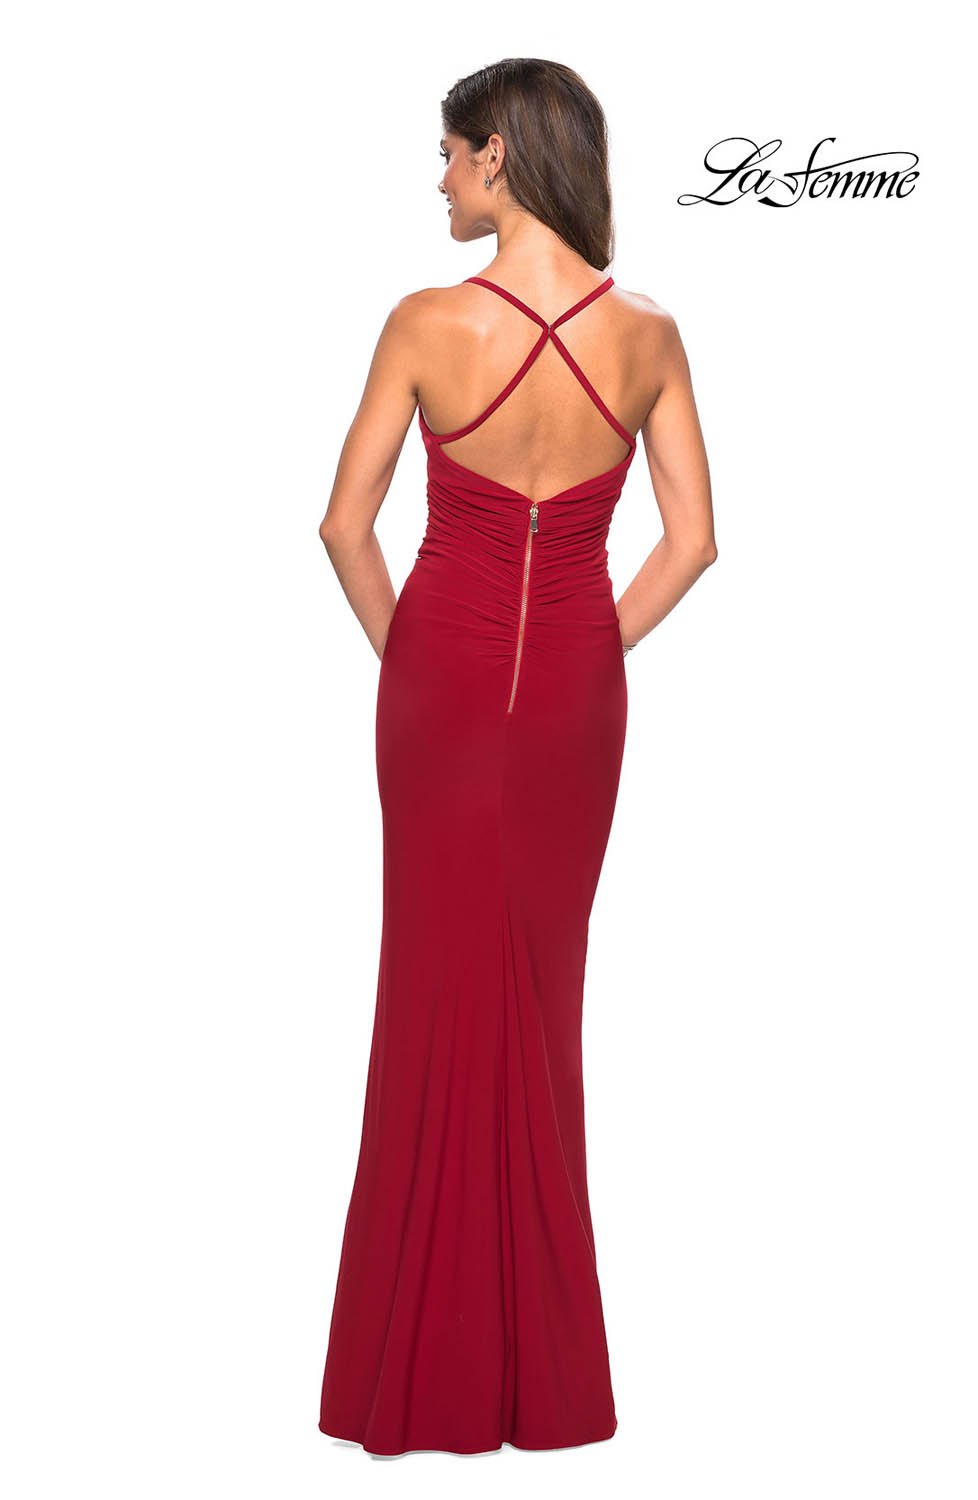 La Femme 27622 dress images in these colors: Black, Forest Green, Gunmetal, Red, Royal Blue.